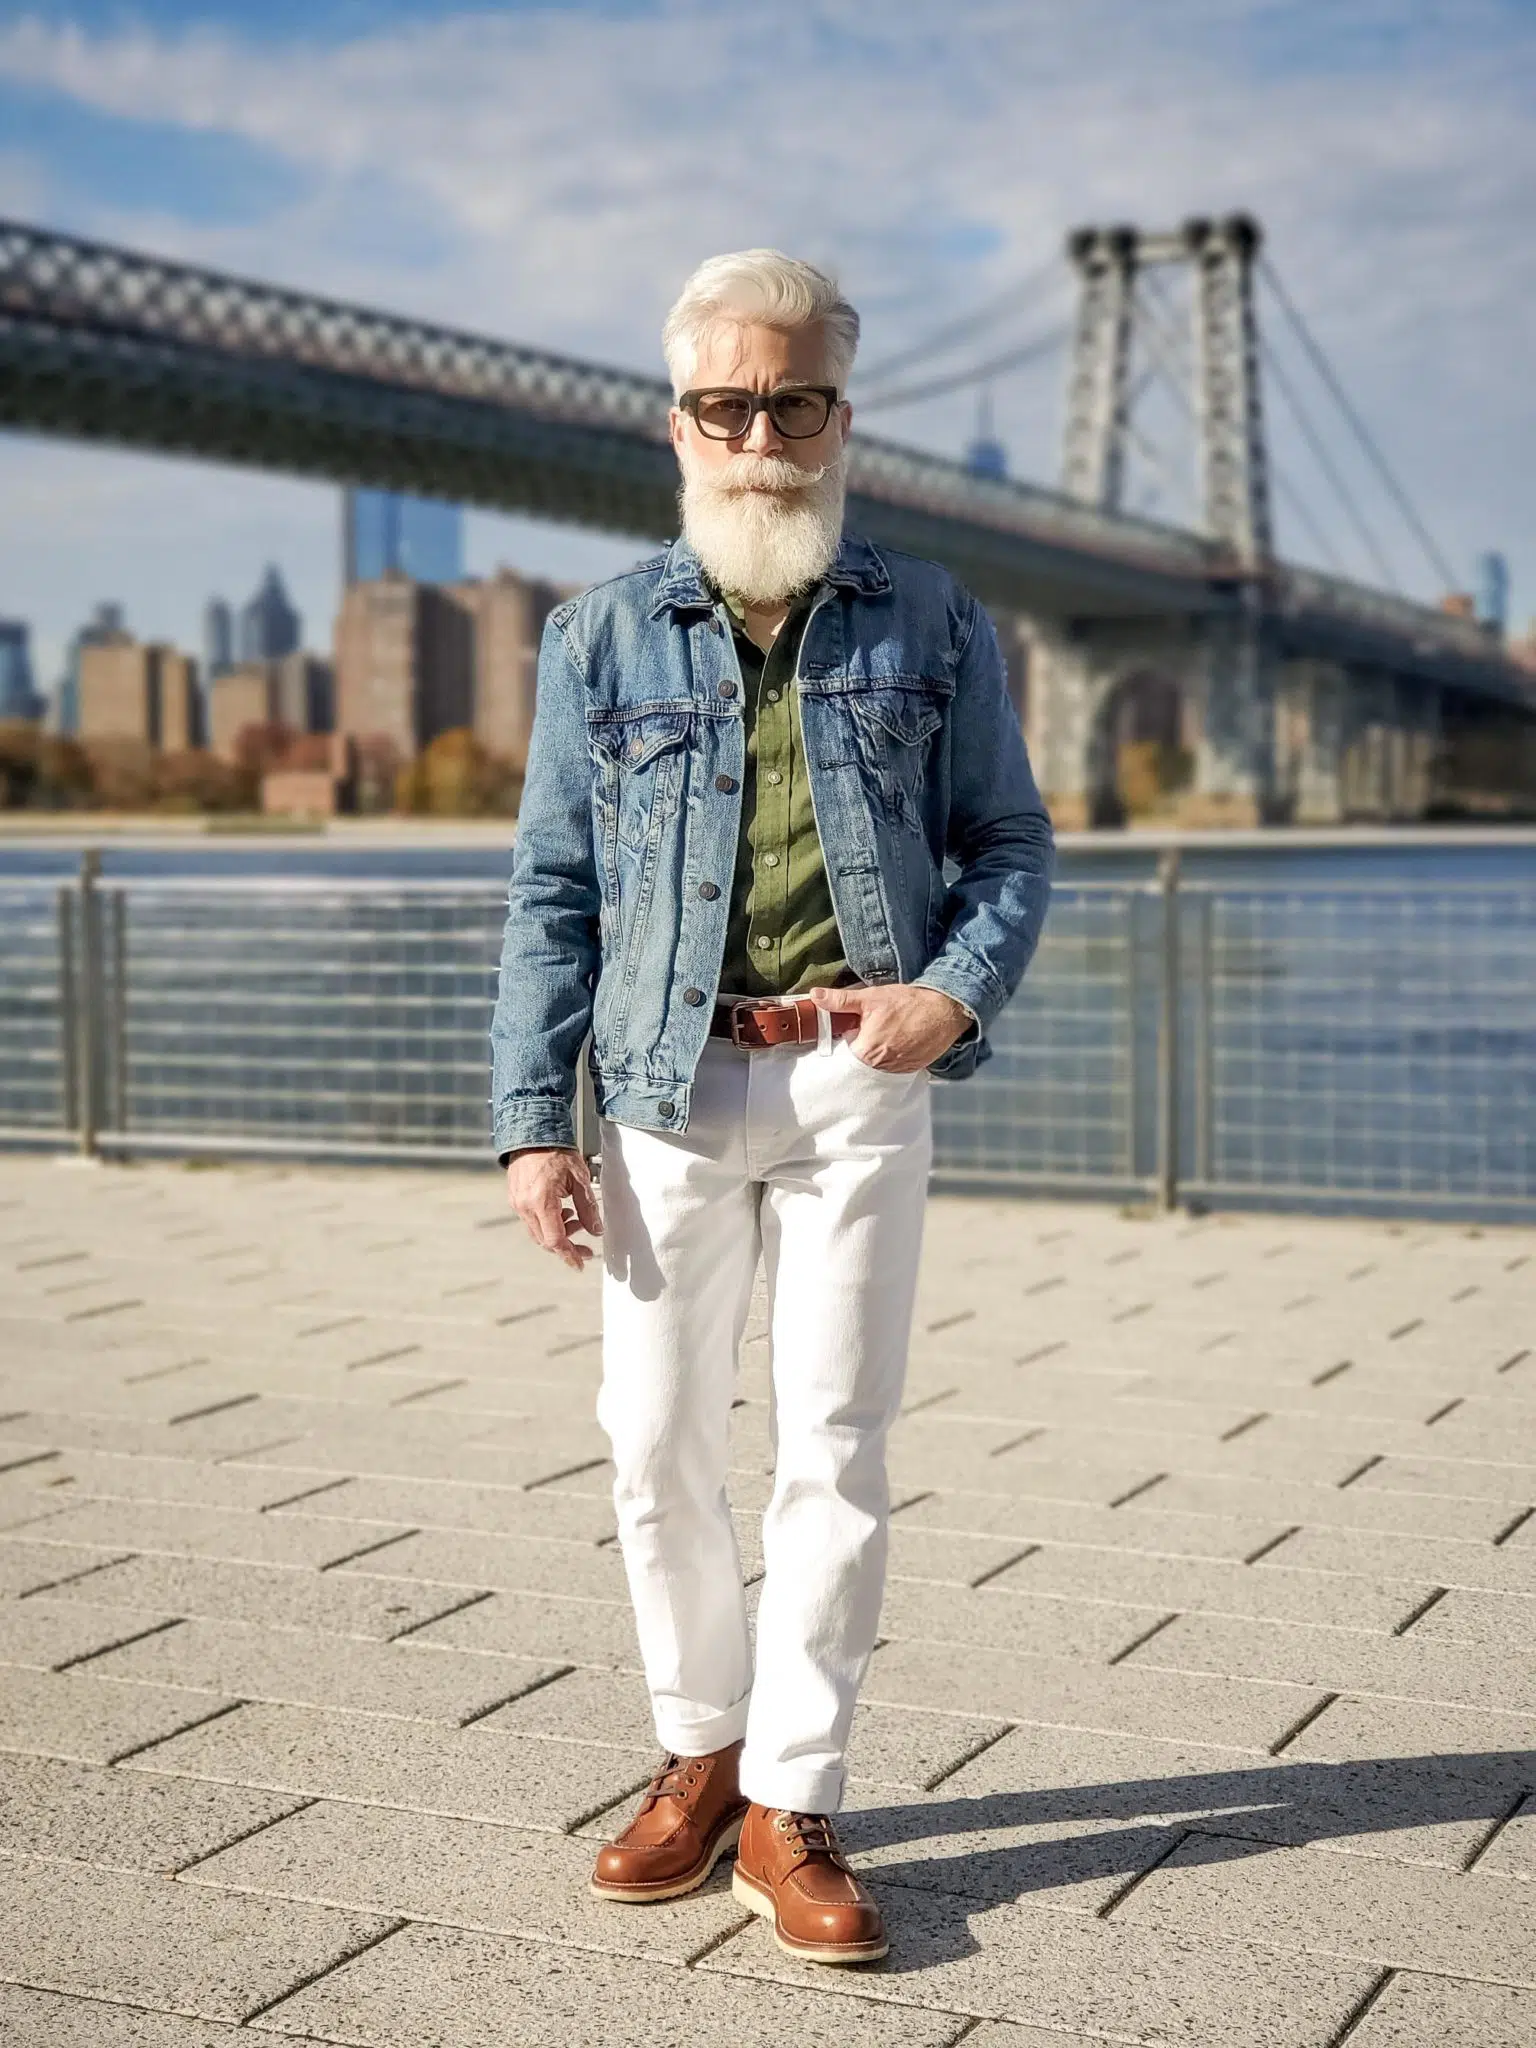 Denim Jacket with White Jeans - The Modest Man